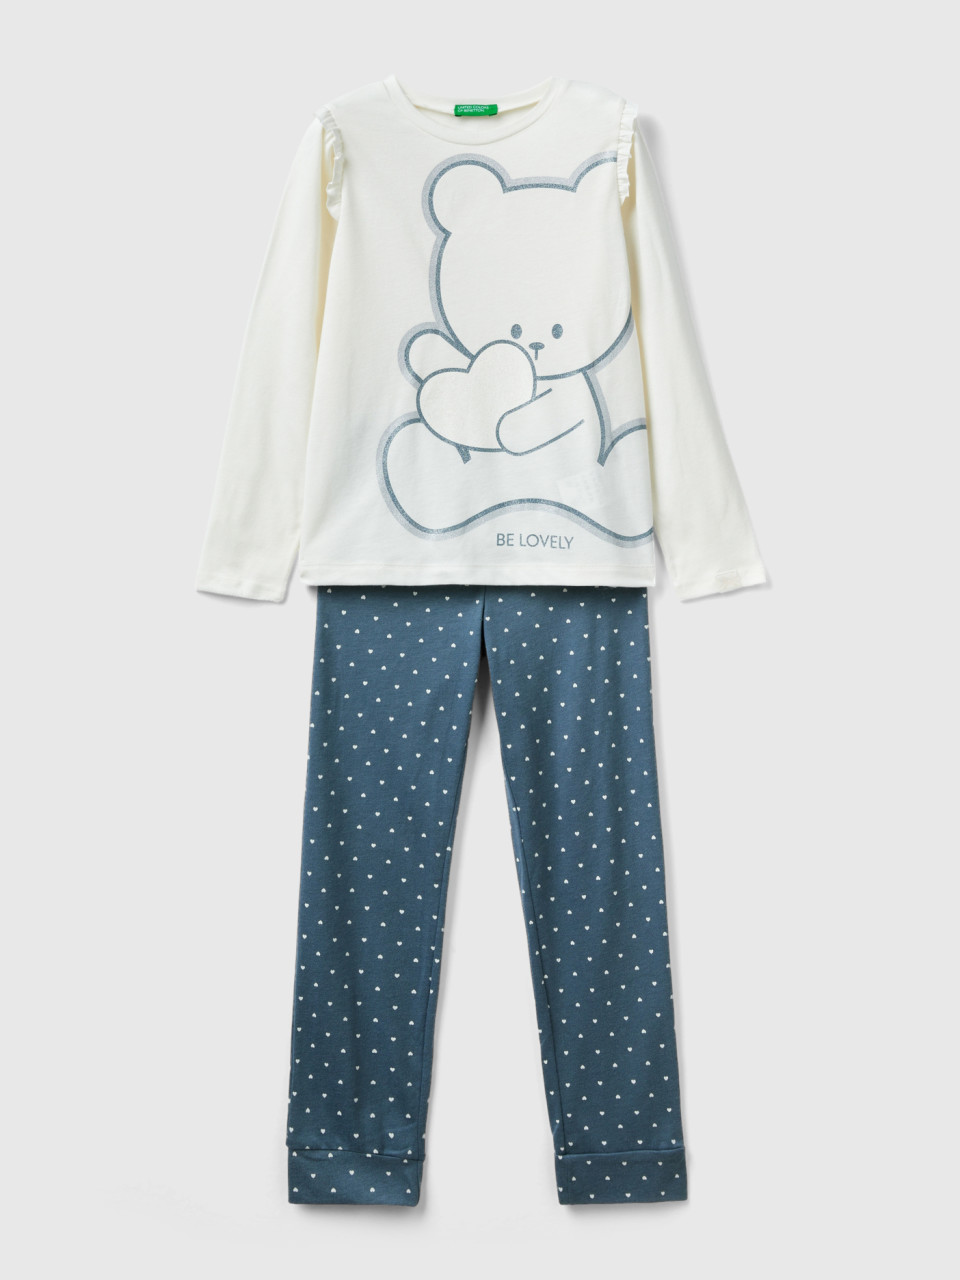 Benetton, Pyjamas With Flowers And Glitter, Multi-color, Kids